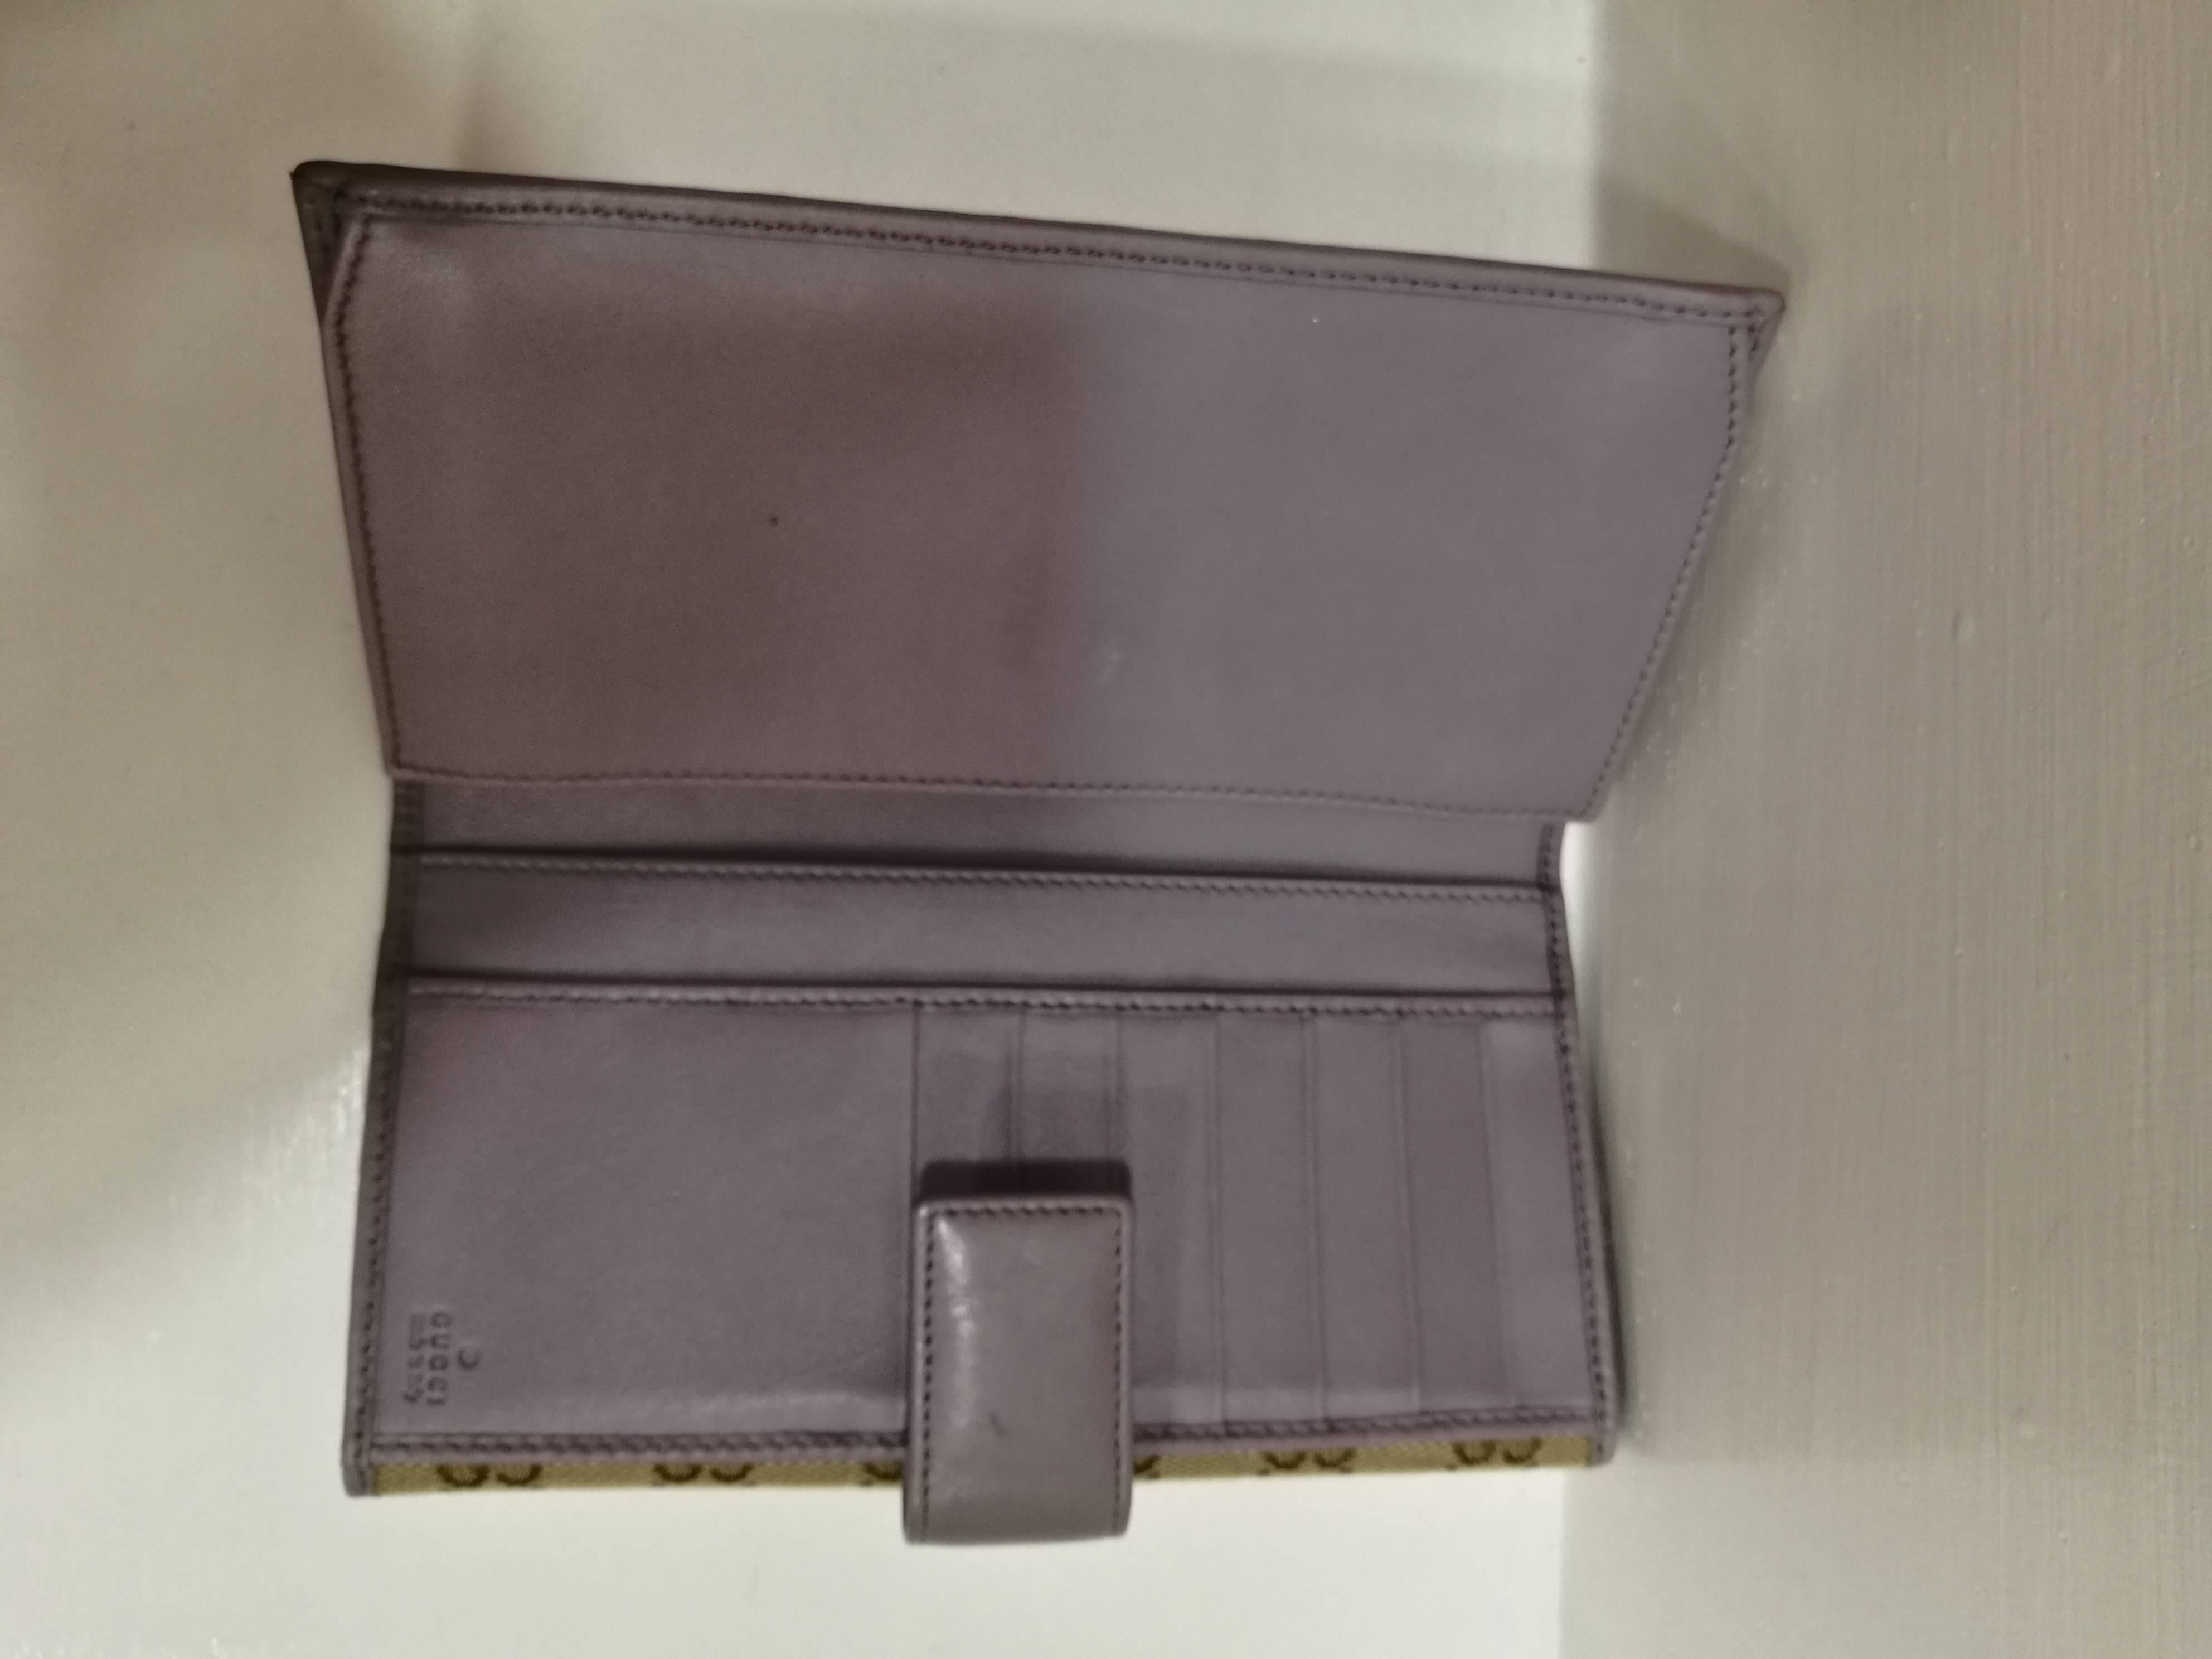 Gucci Wallet NWOT
Monogram textile light purple leather wallet still with box